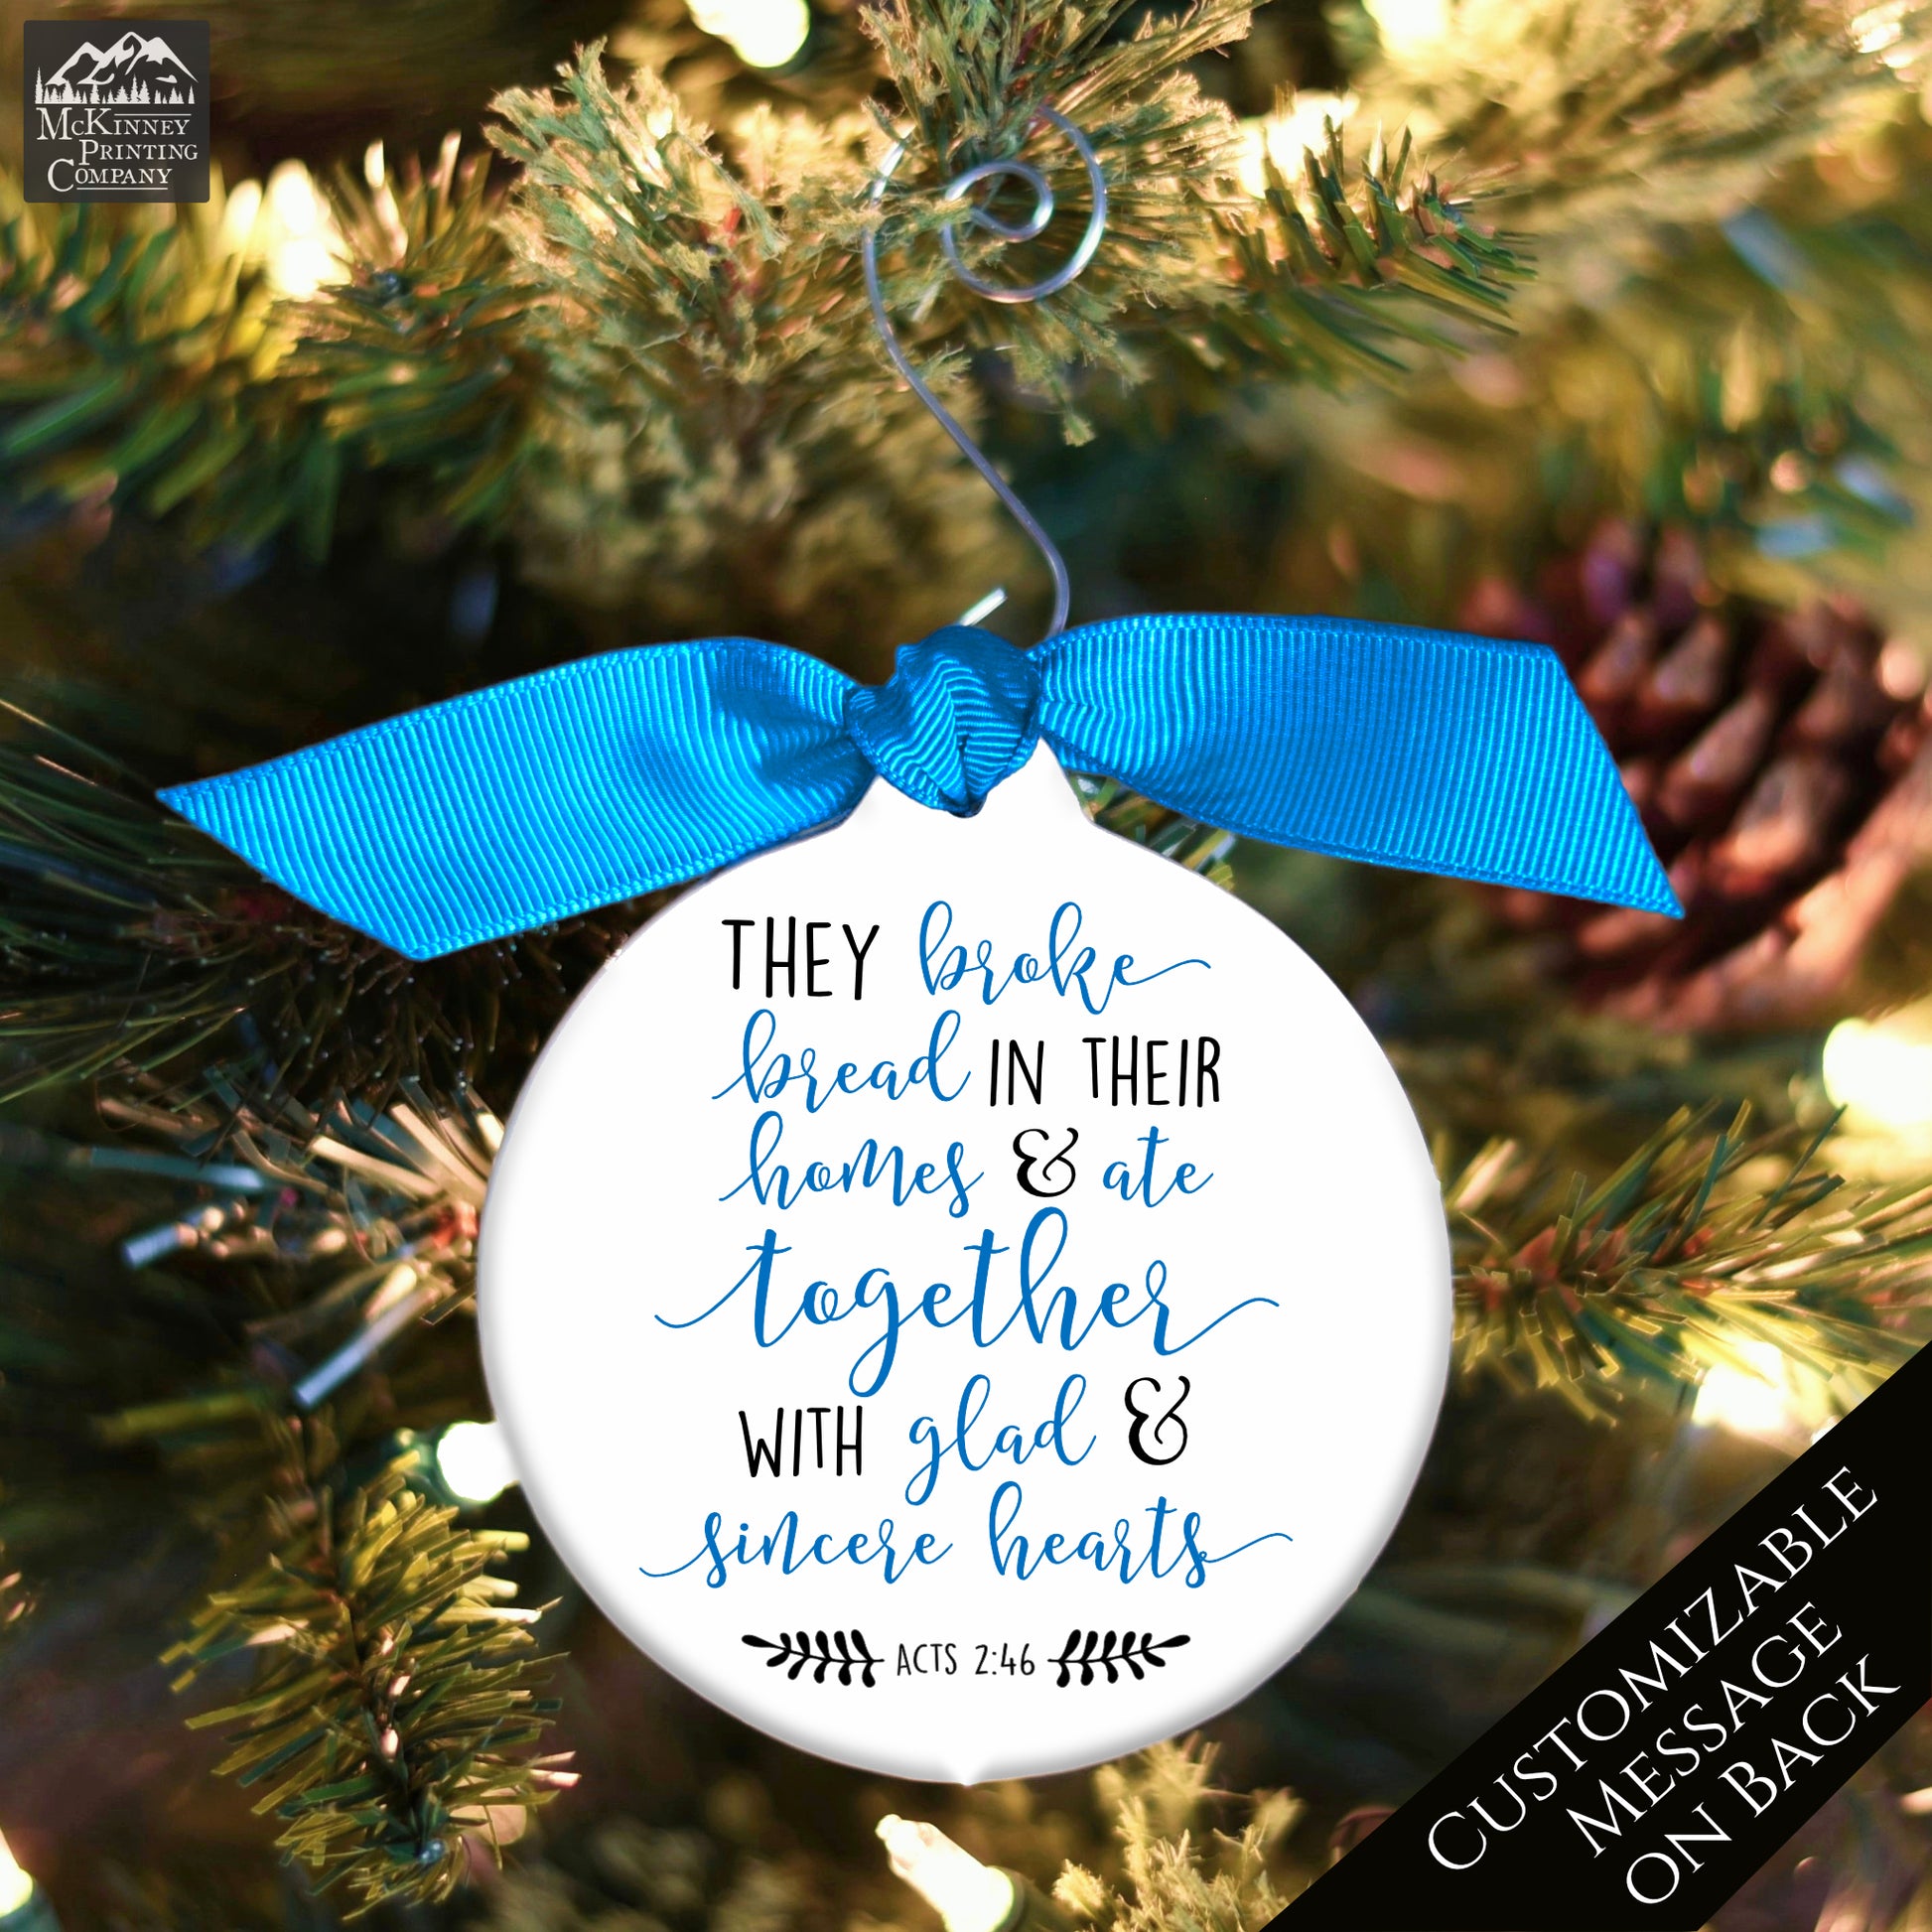 They broke bread in their homes and ate together with glad and sincere hearts - Acts 2:46 - Christmas Ornament